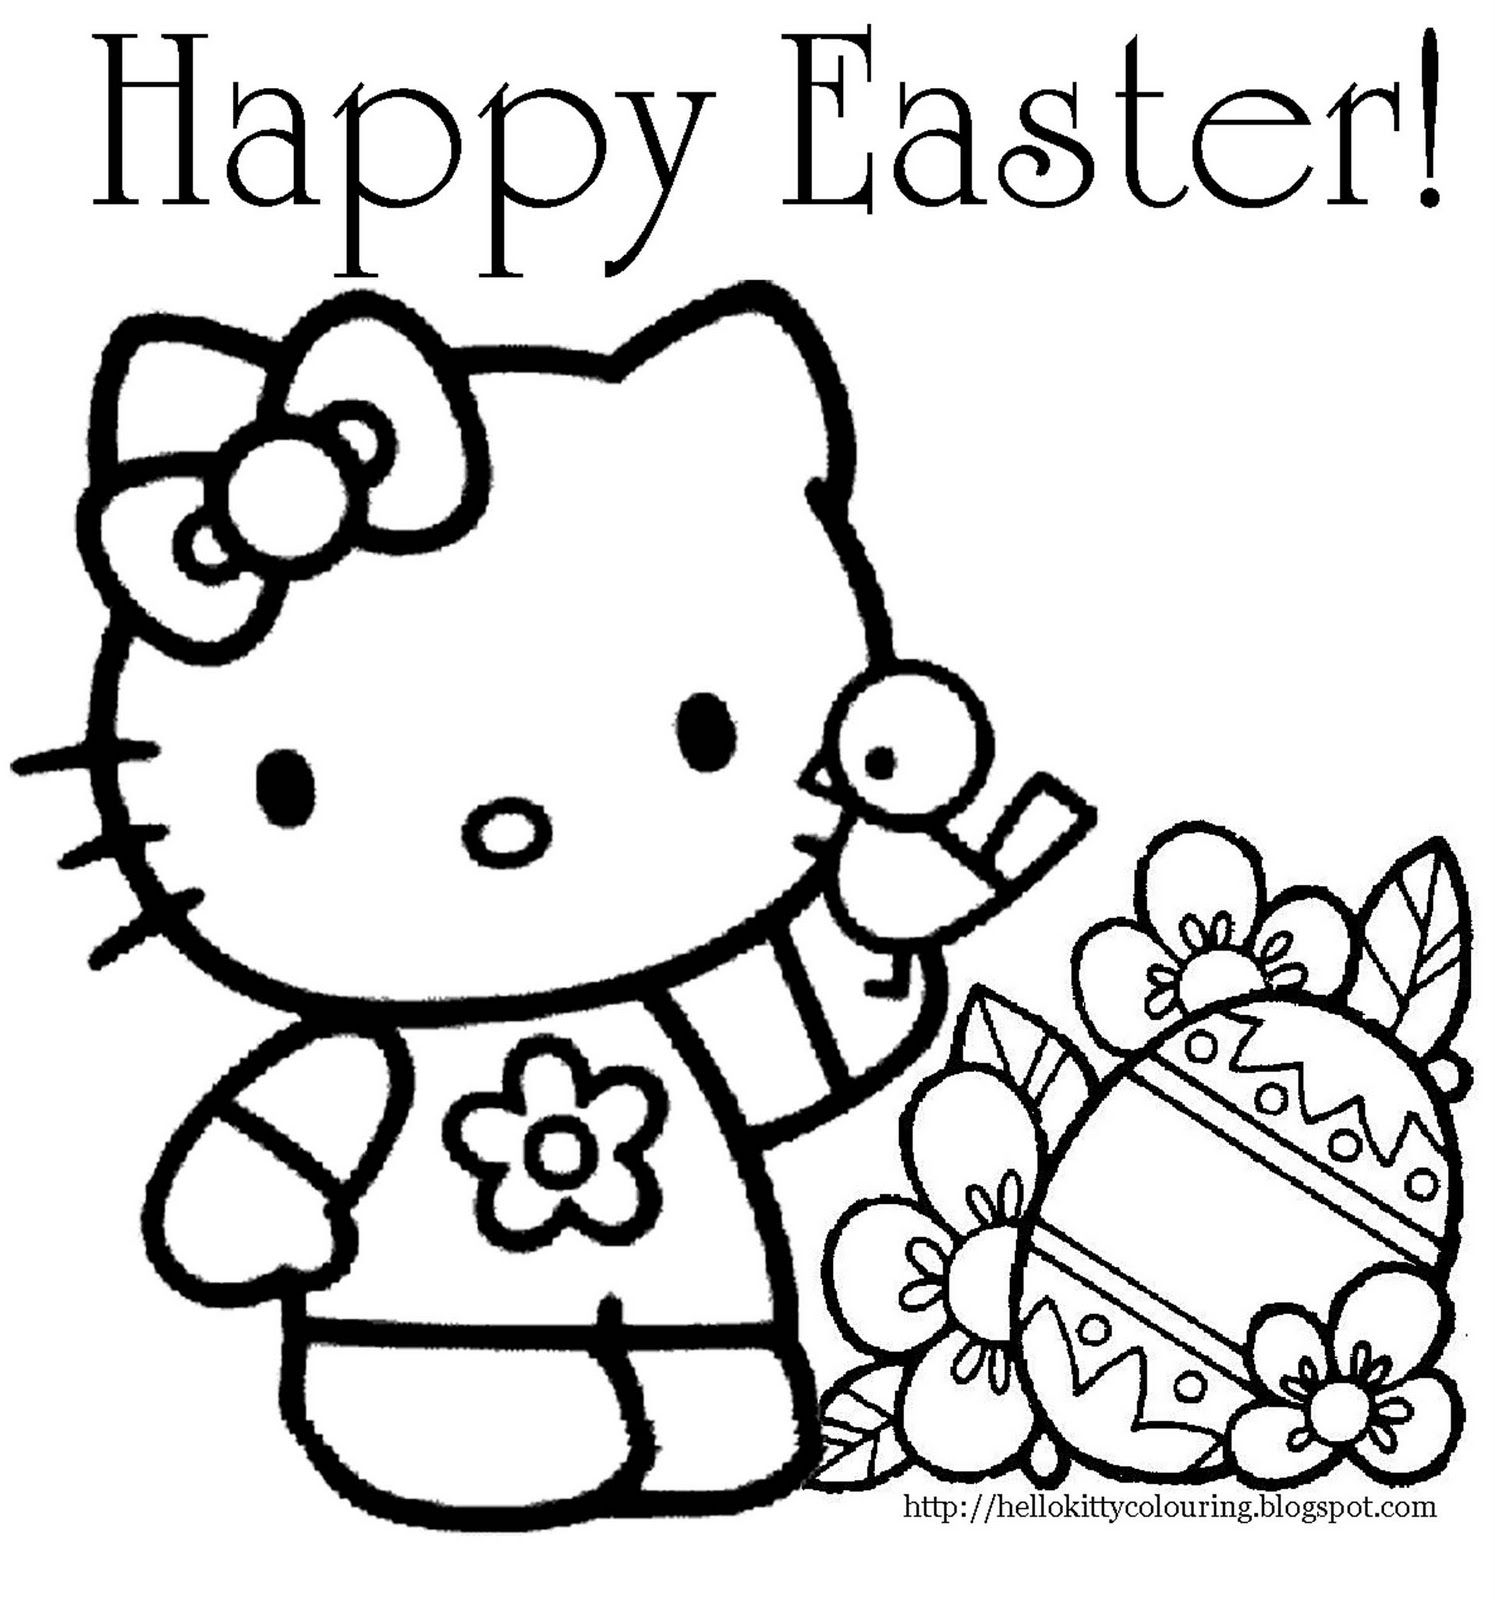 EASTER COLOURING: MISCELLANEOUS EASTER COLOURING PAGES